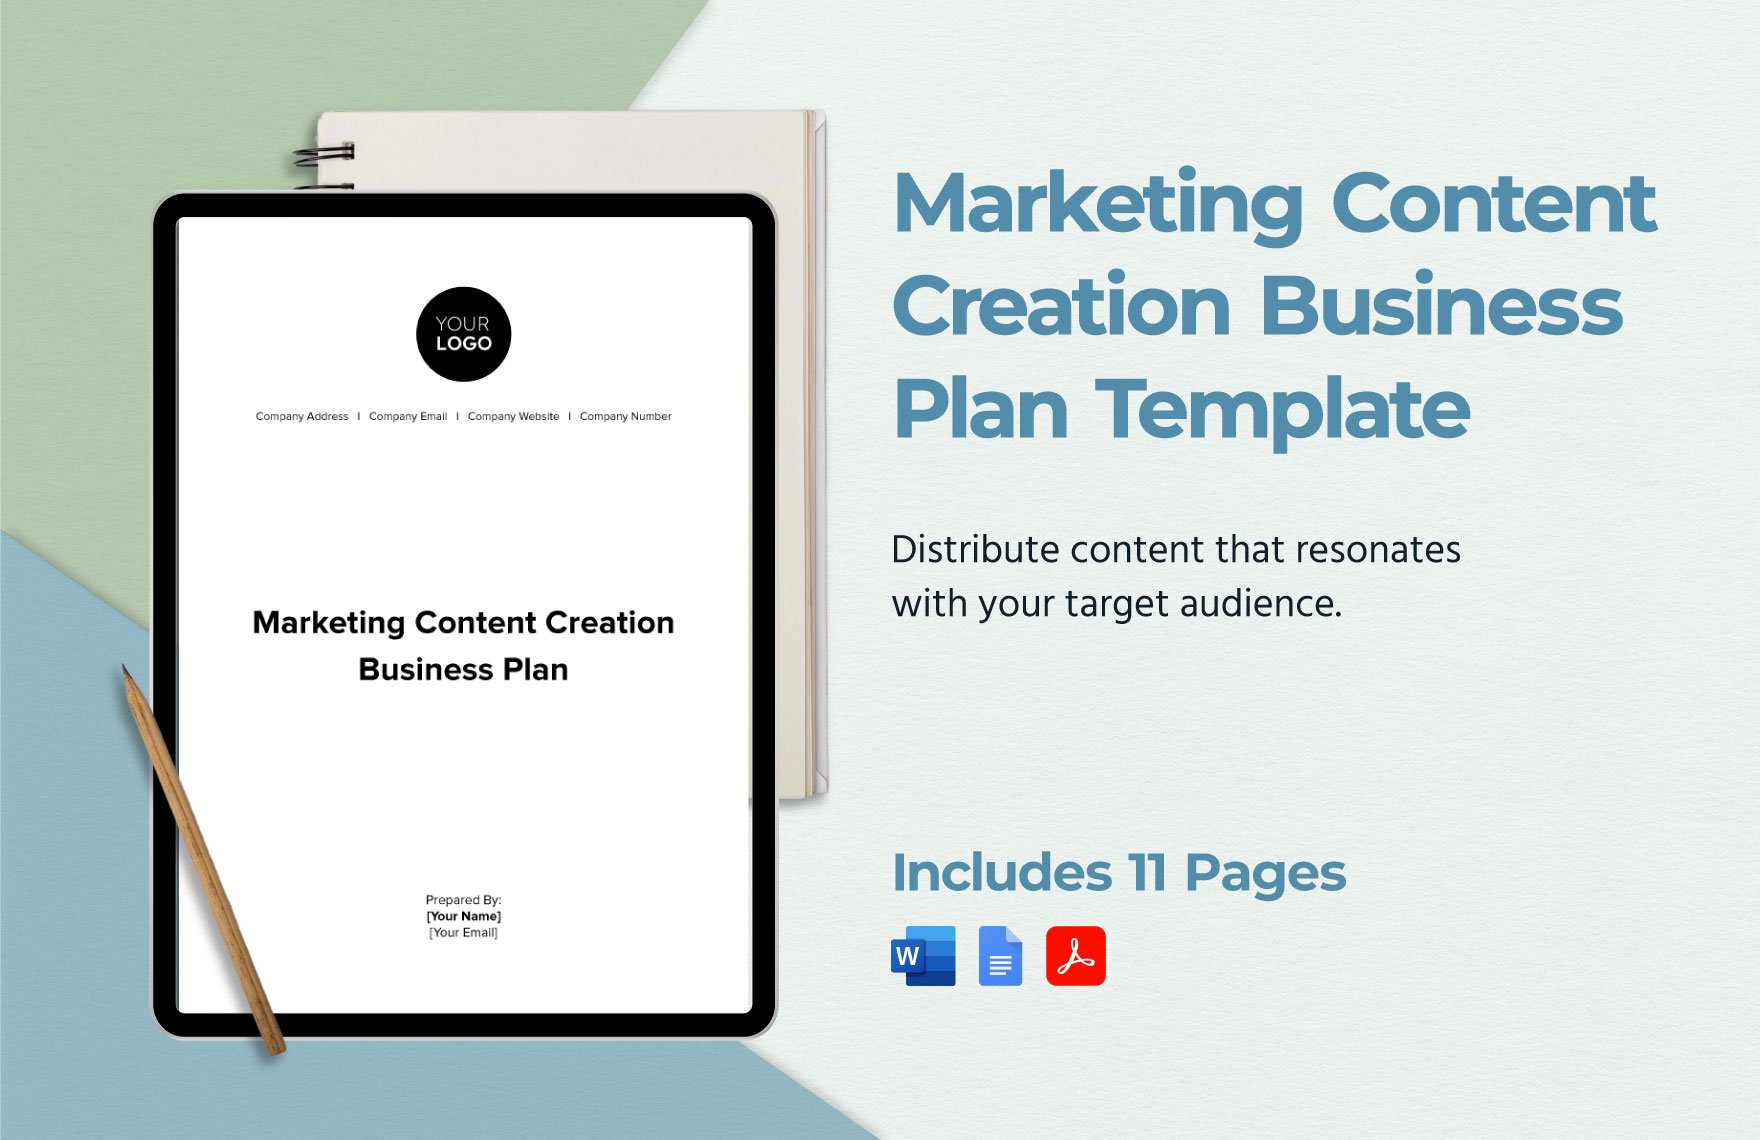 Marketing Content Creation Business Plan Template